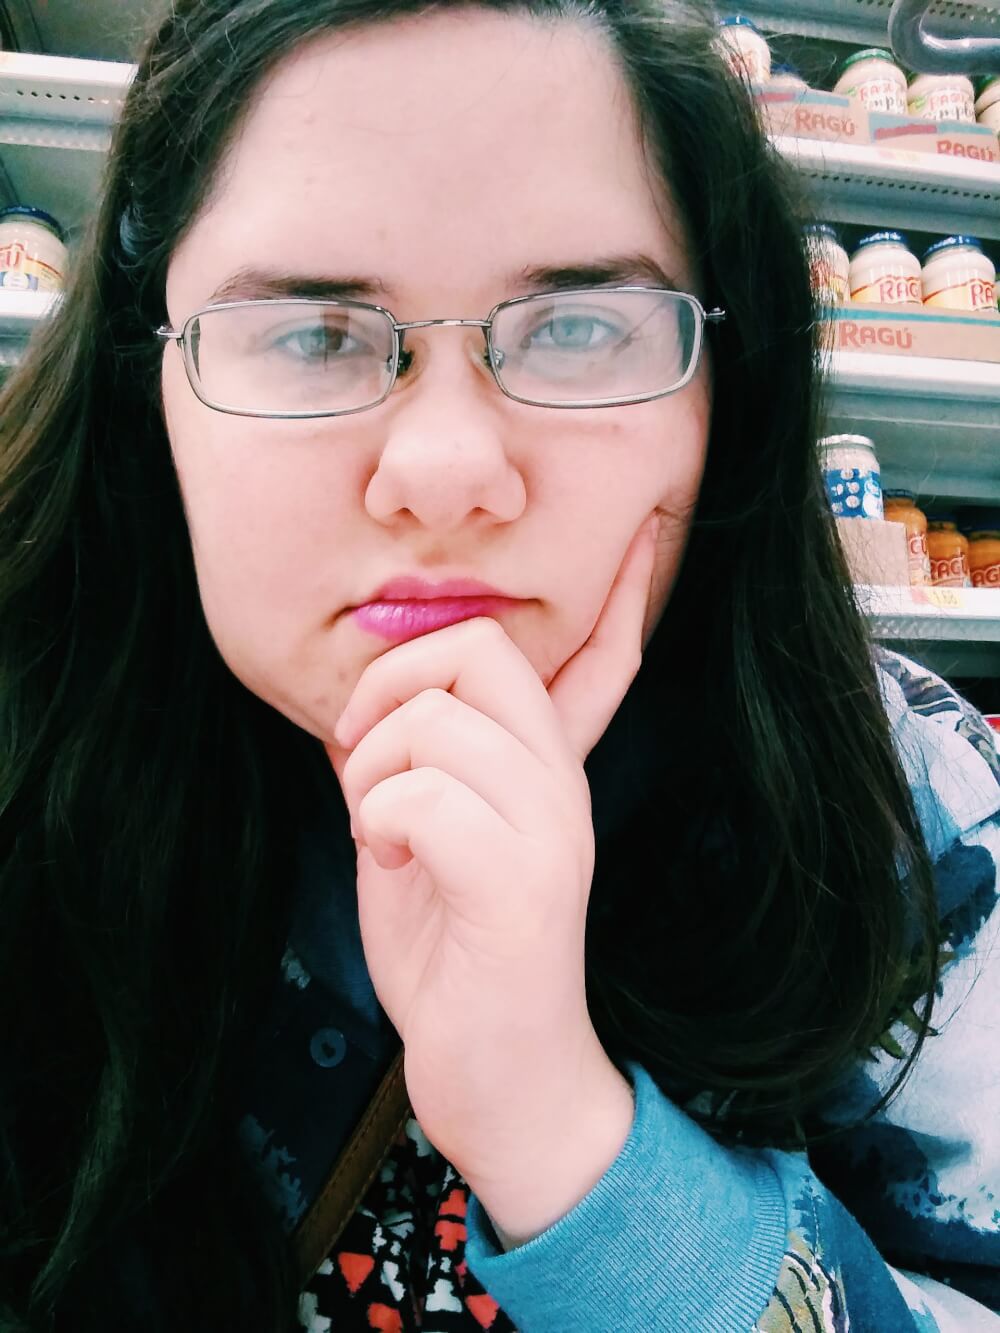 Nonchalant selfie while sitting in Walmart aisle on Black Friday